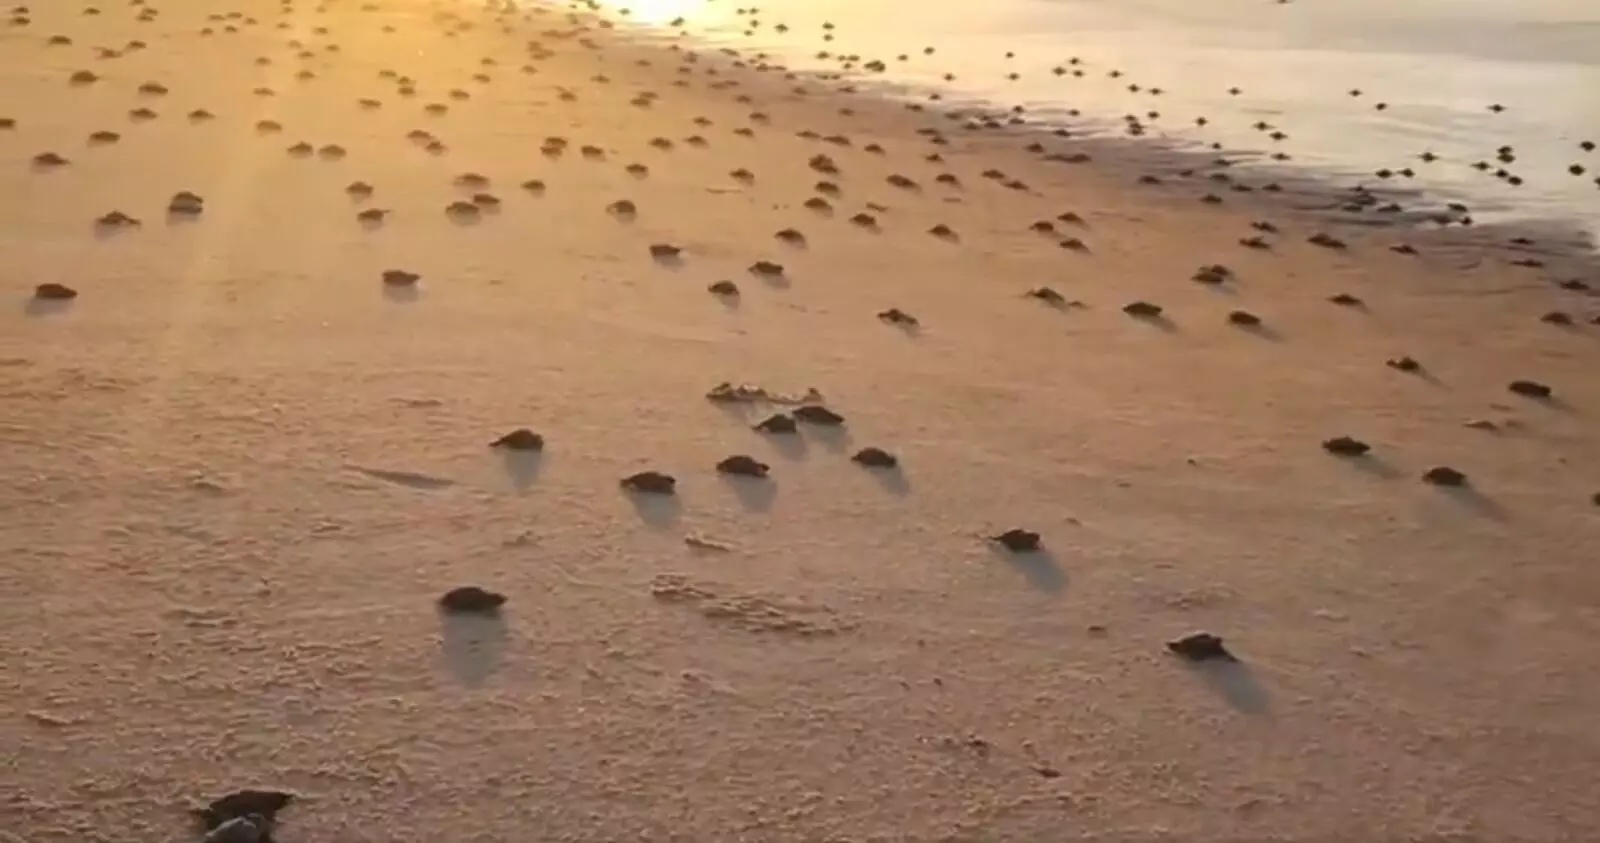 Baby Olive Ridley turtles break out of their eggshells